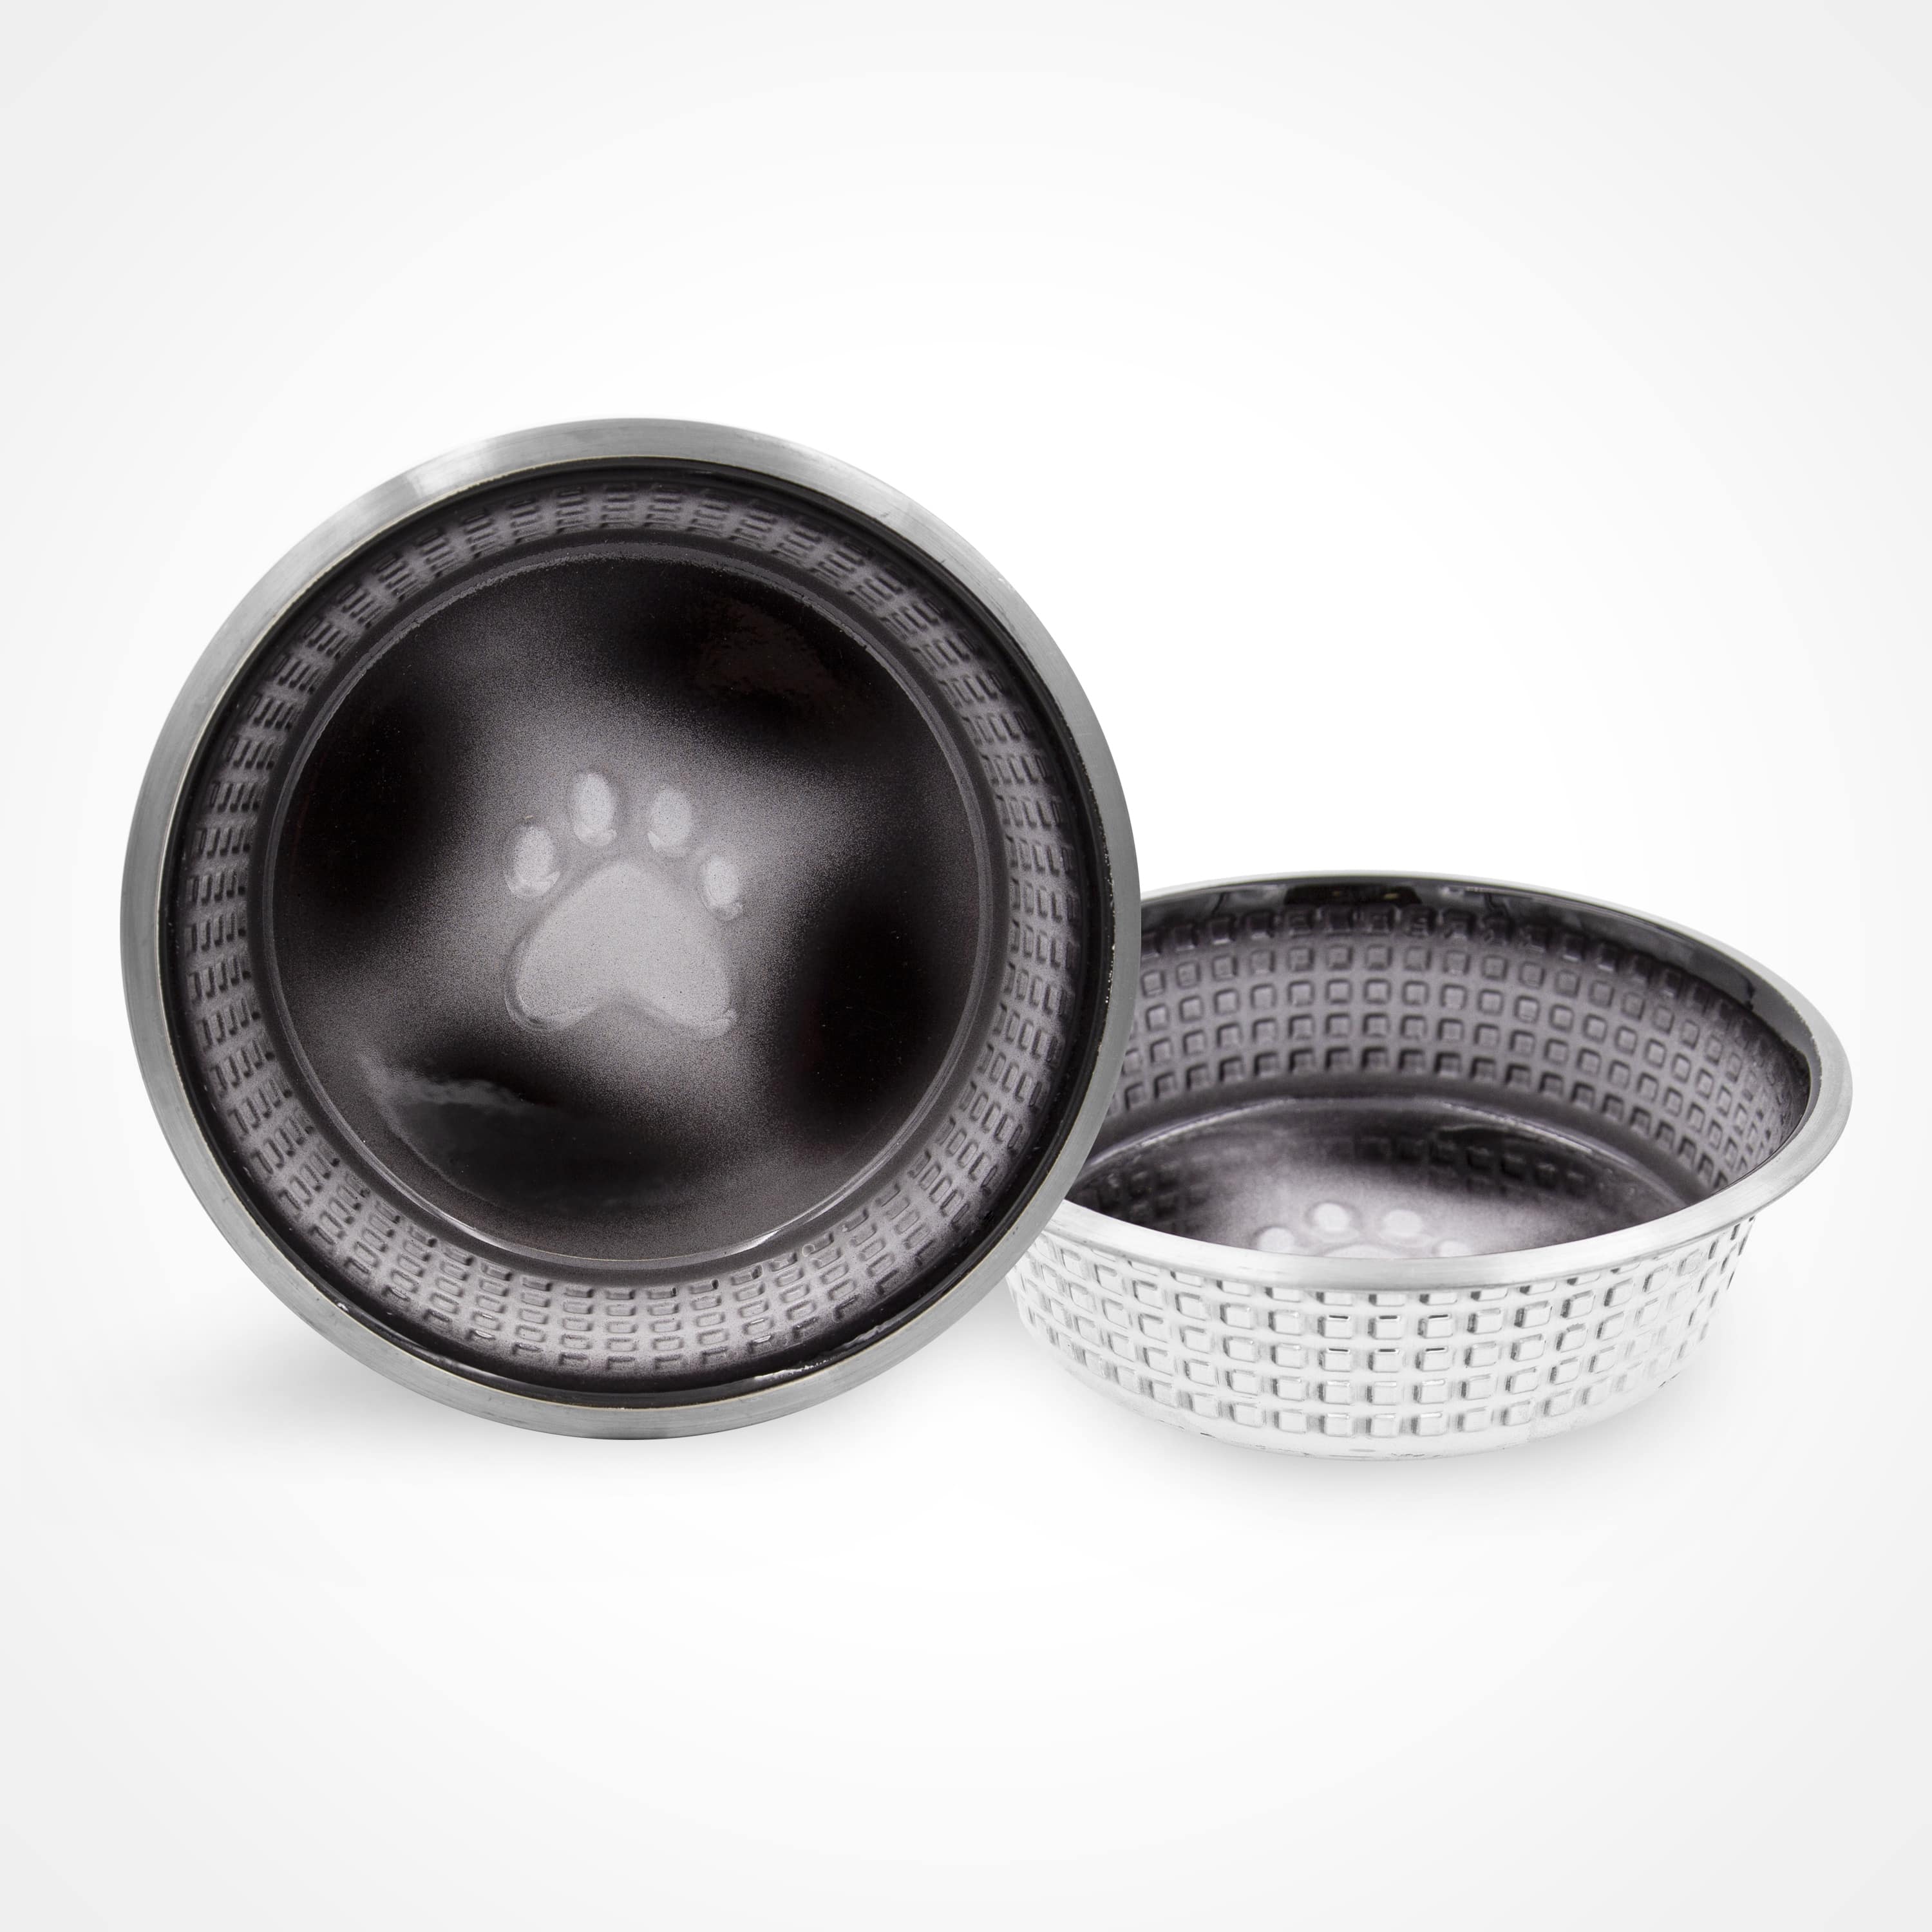 https://fuzzypuppypetproducts.com/wp-content/uploads/2021/07/FPPD_black-dog-bowls.jpg